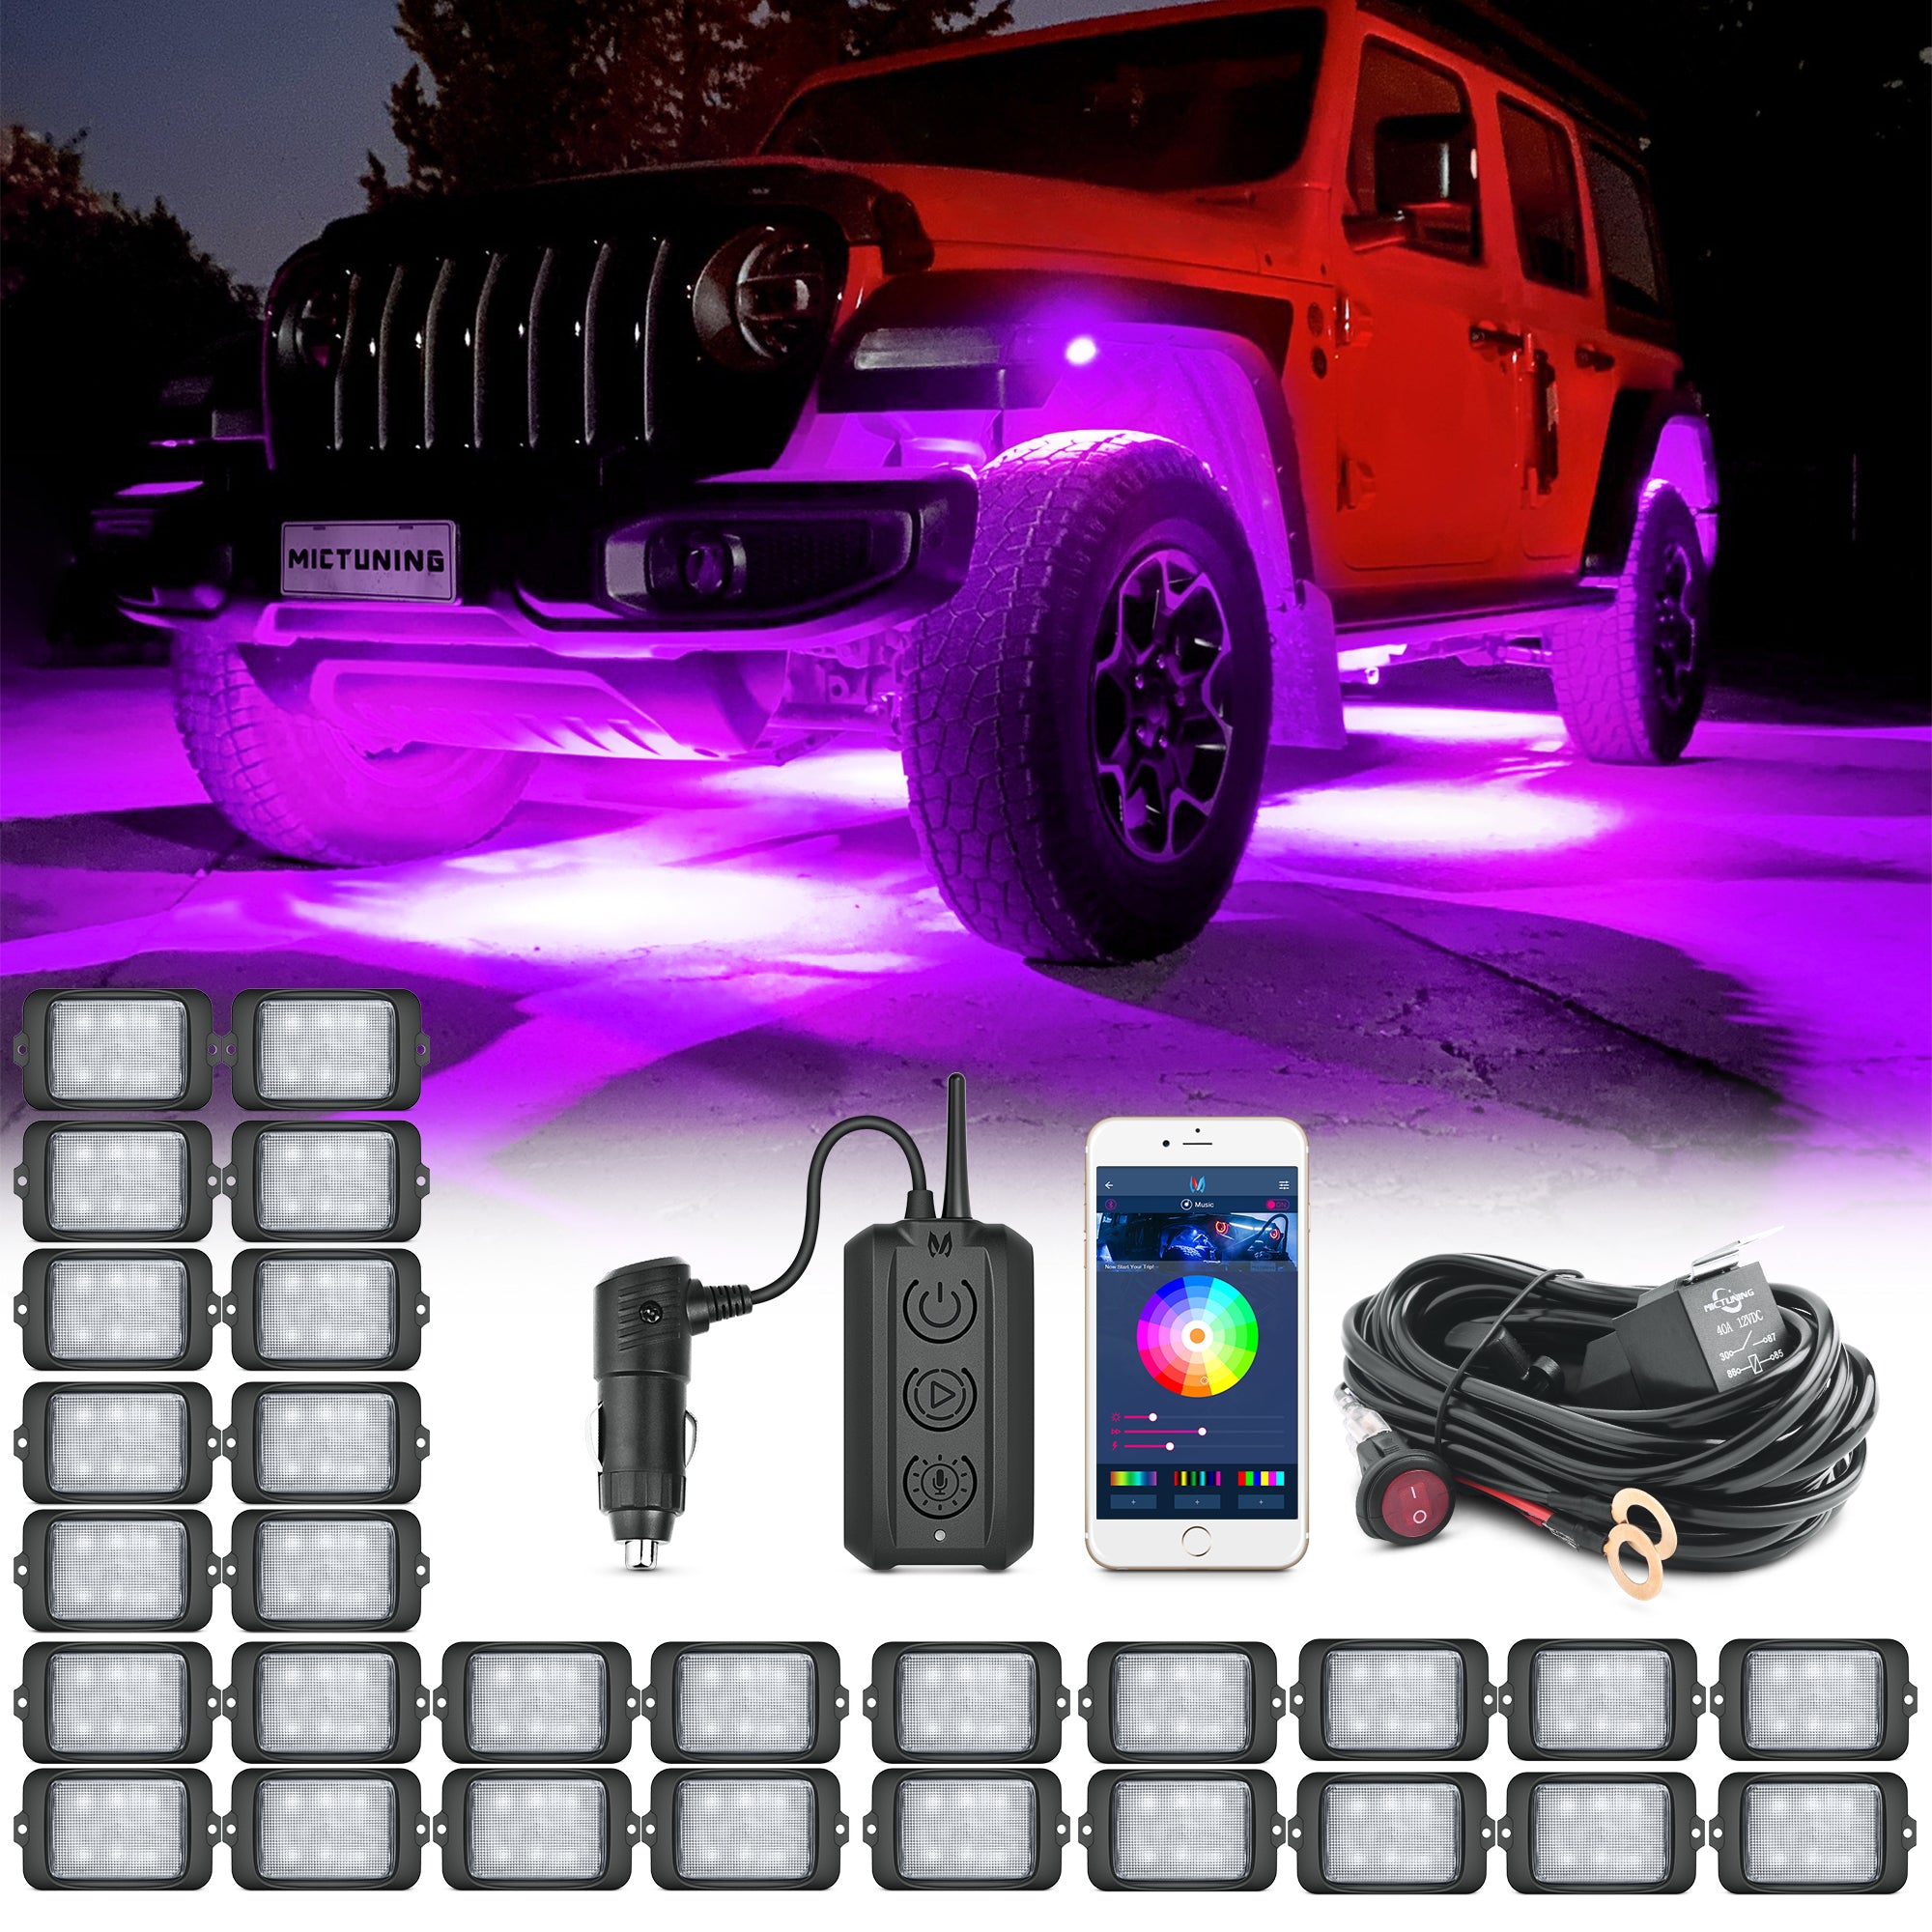 C3 Extensible RGBW LED Rock Lights - 28 Pods Wireless Control Multi-Color Neon Underglow Lights